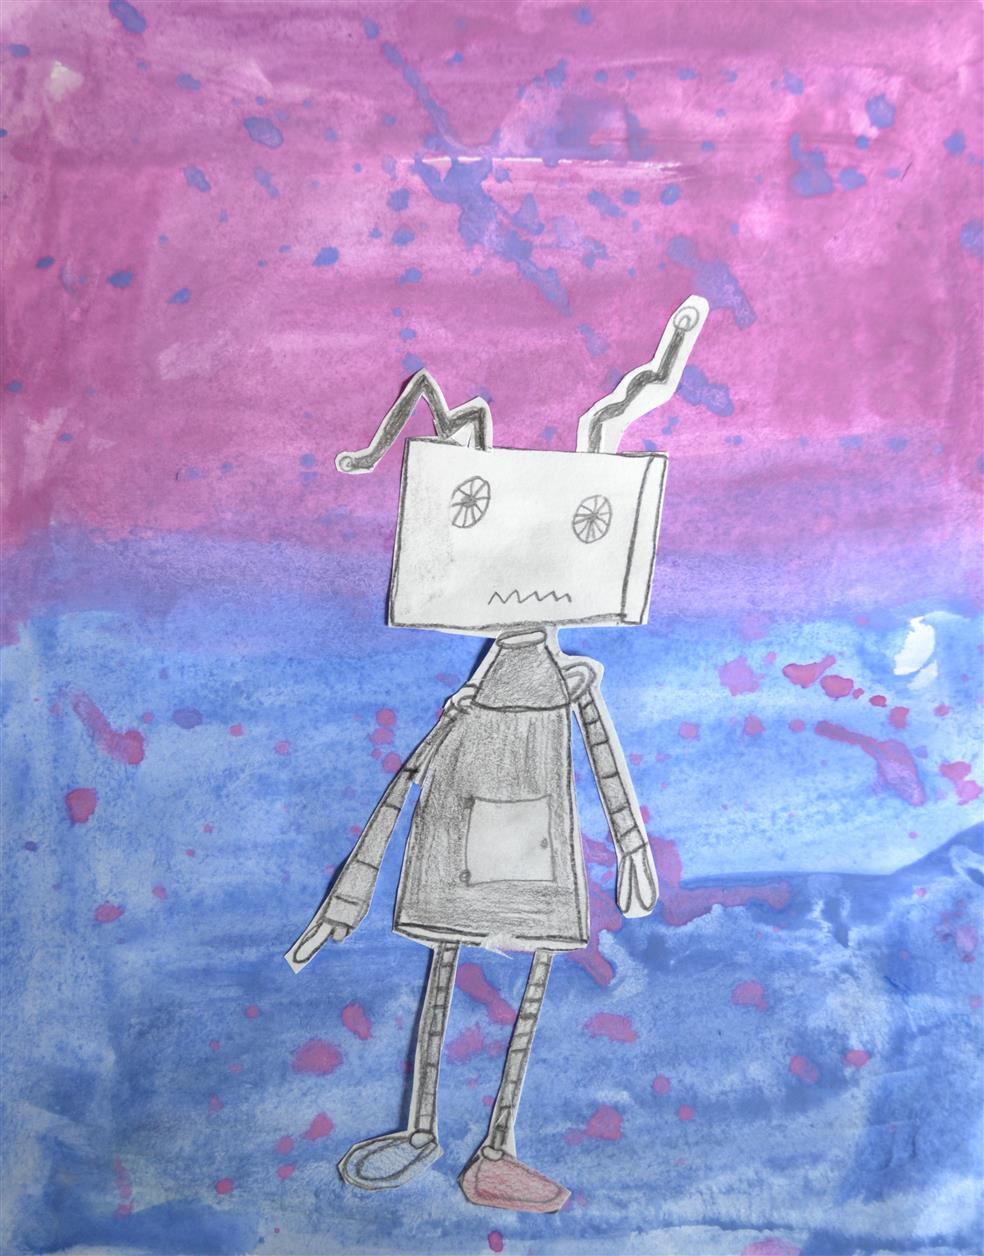 Space Robots by K.B. - 2nd Grade, Coleman